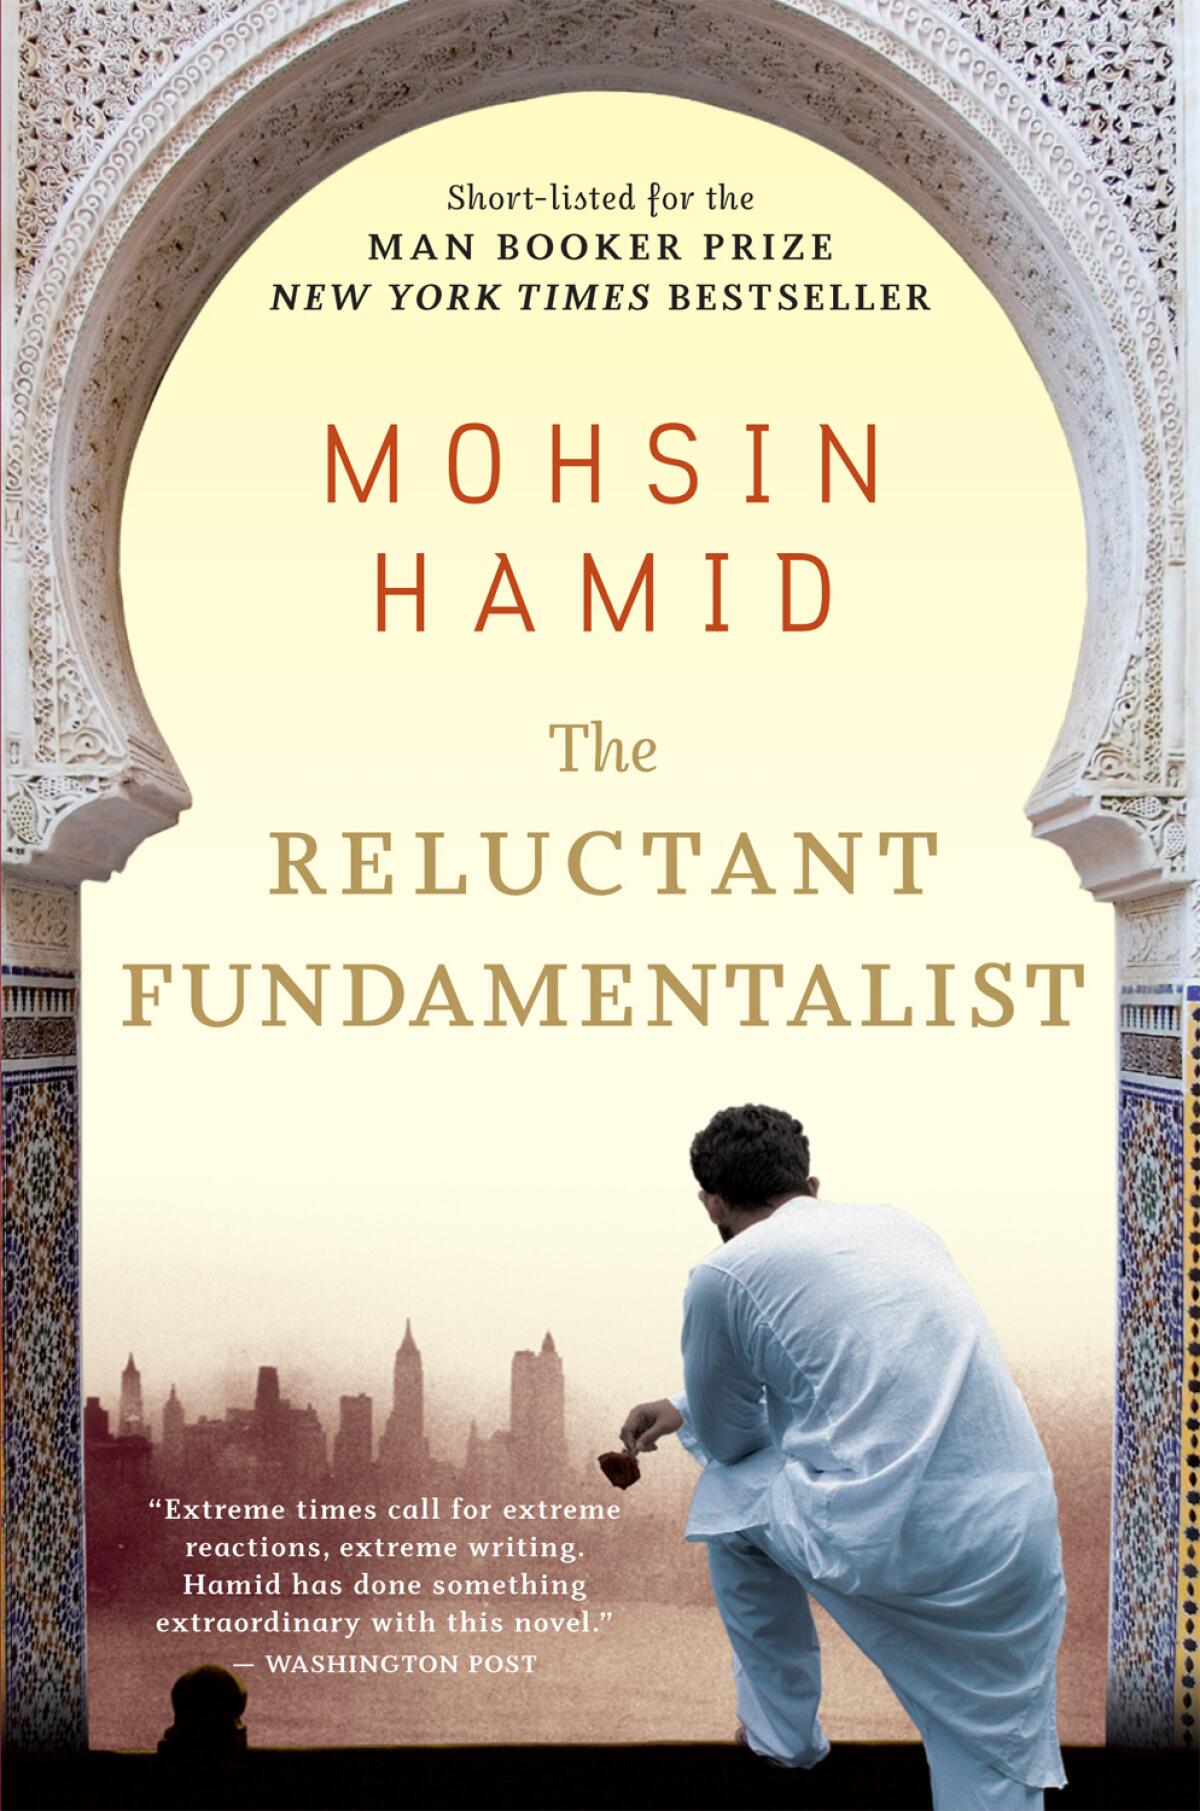 Book jacket for "The Reluctant Fundamentalist" by Mohsin Hamid